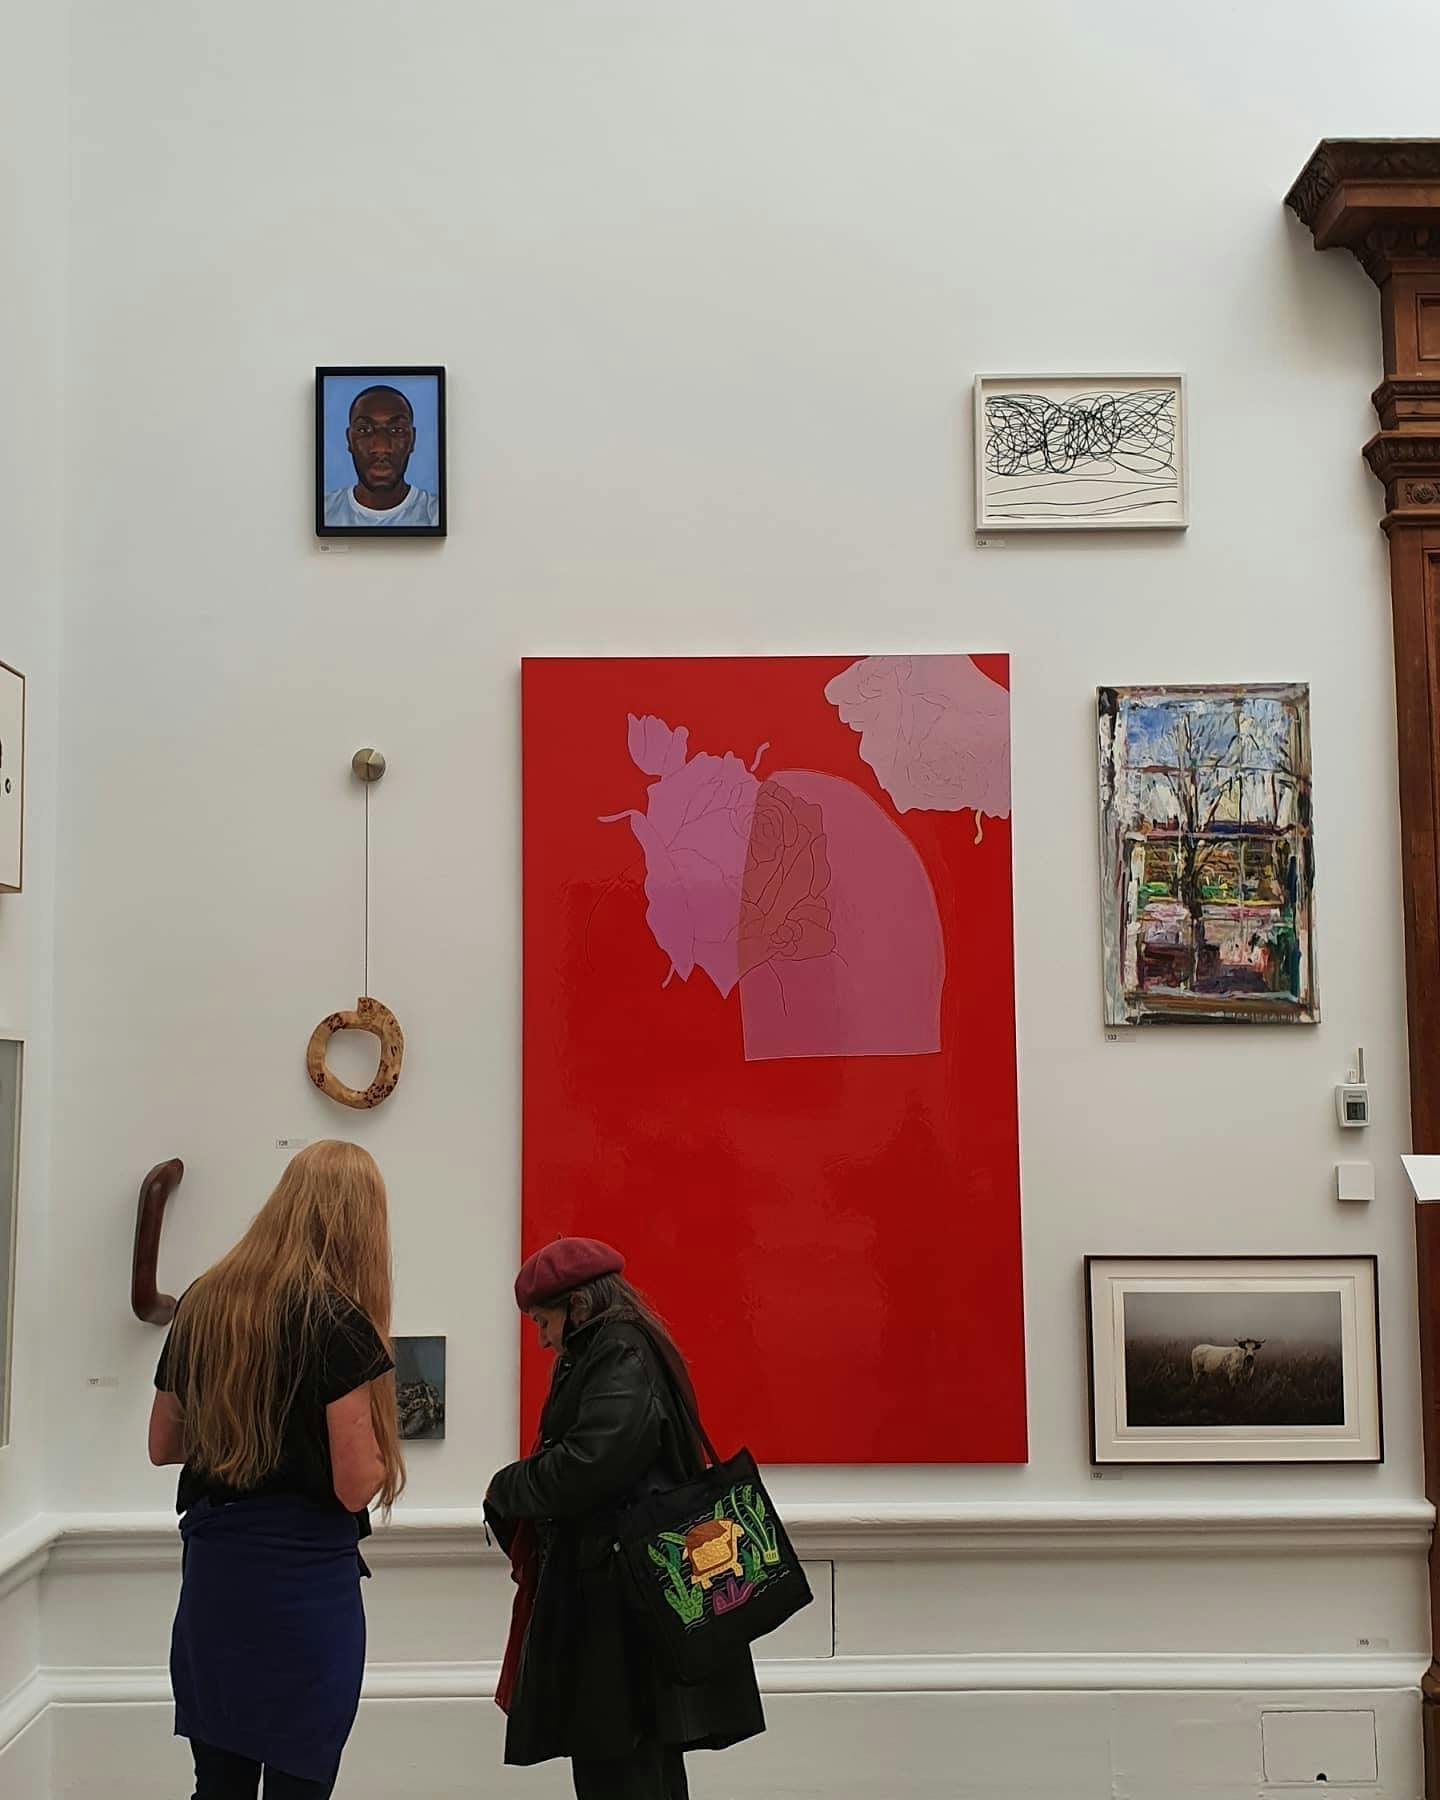 Xanthe's painting in place in the Royal Academy of Arts, two people stand to the left hand corner of the photo looking at the paintings, one of which is large and red with pink, surrounded by smaller paintings and framed pictures